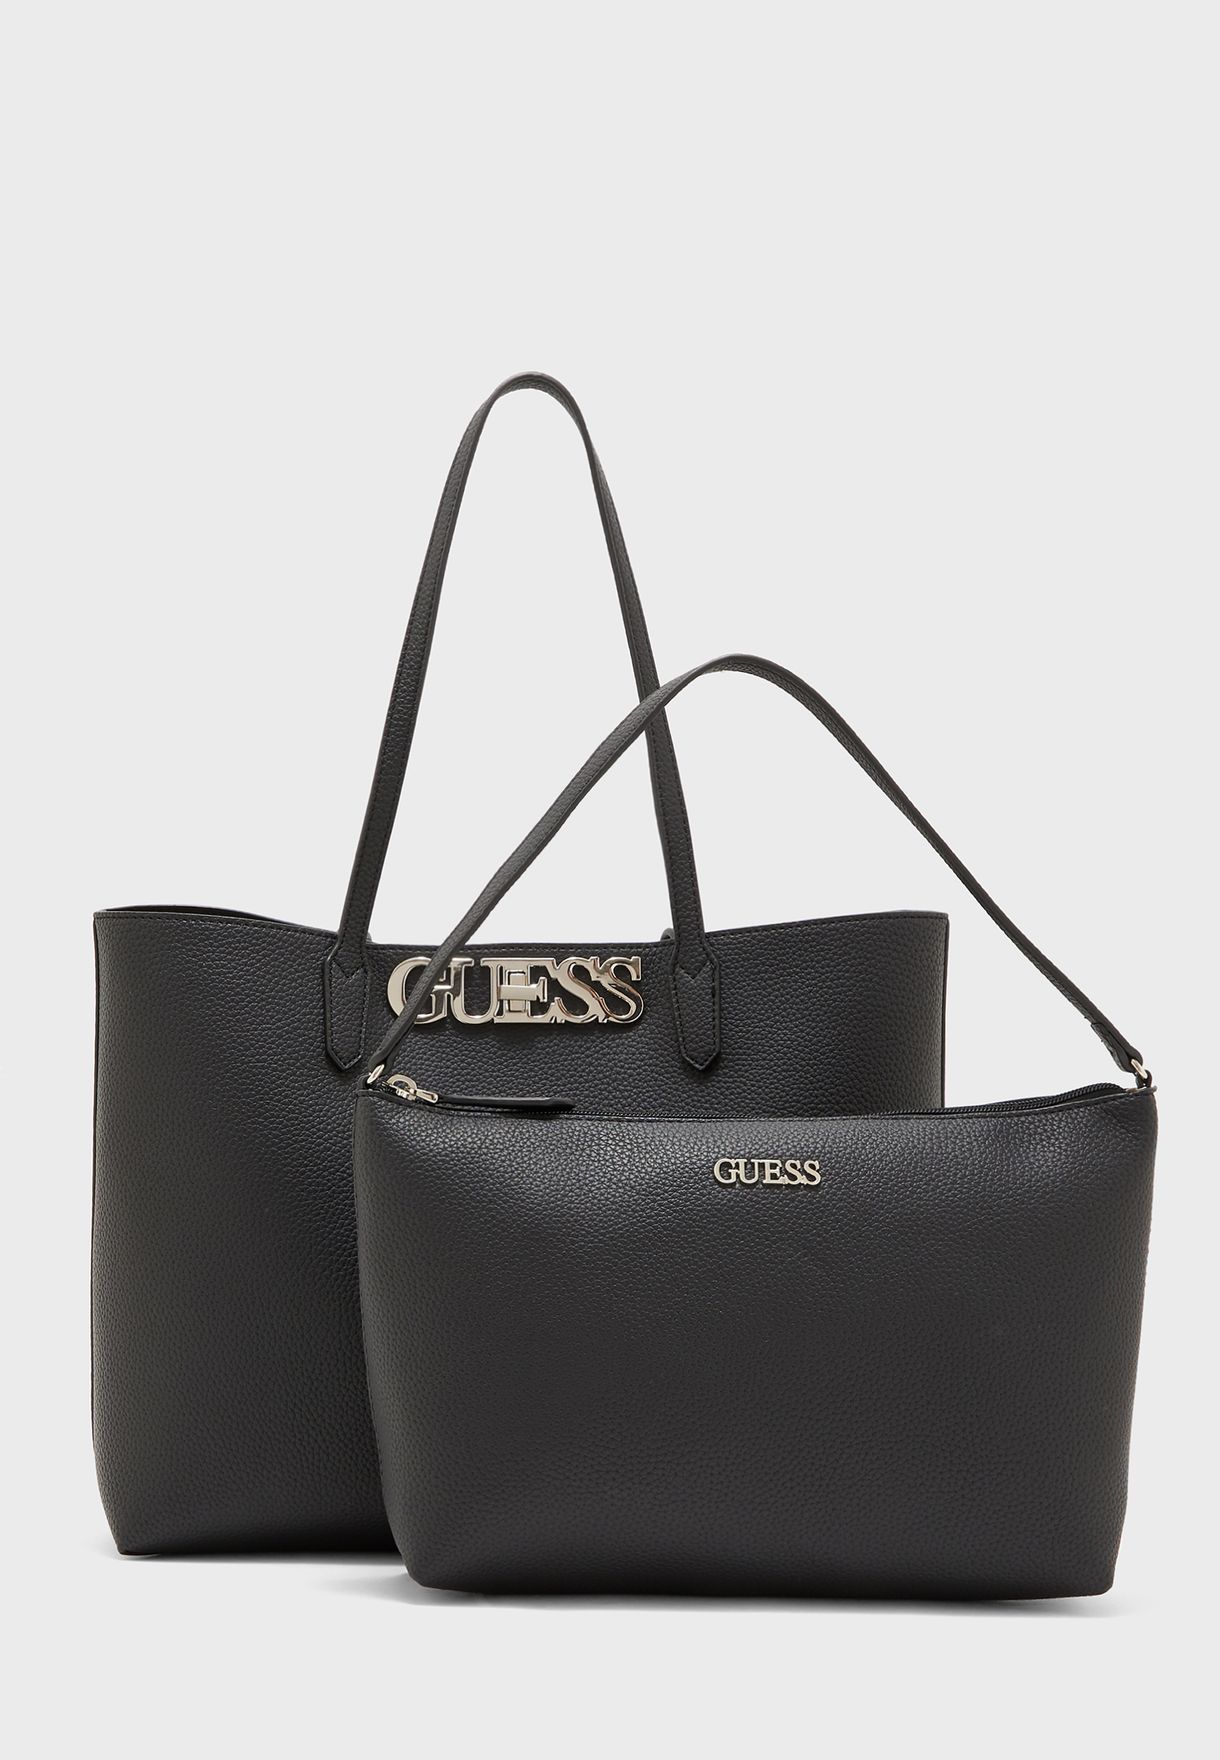 Uptown Chic Barcelona Tote